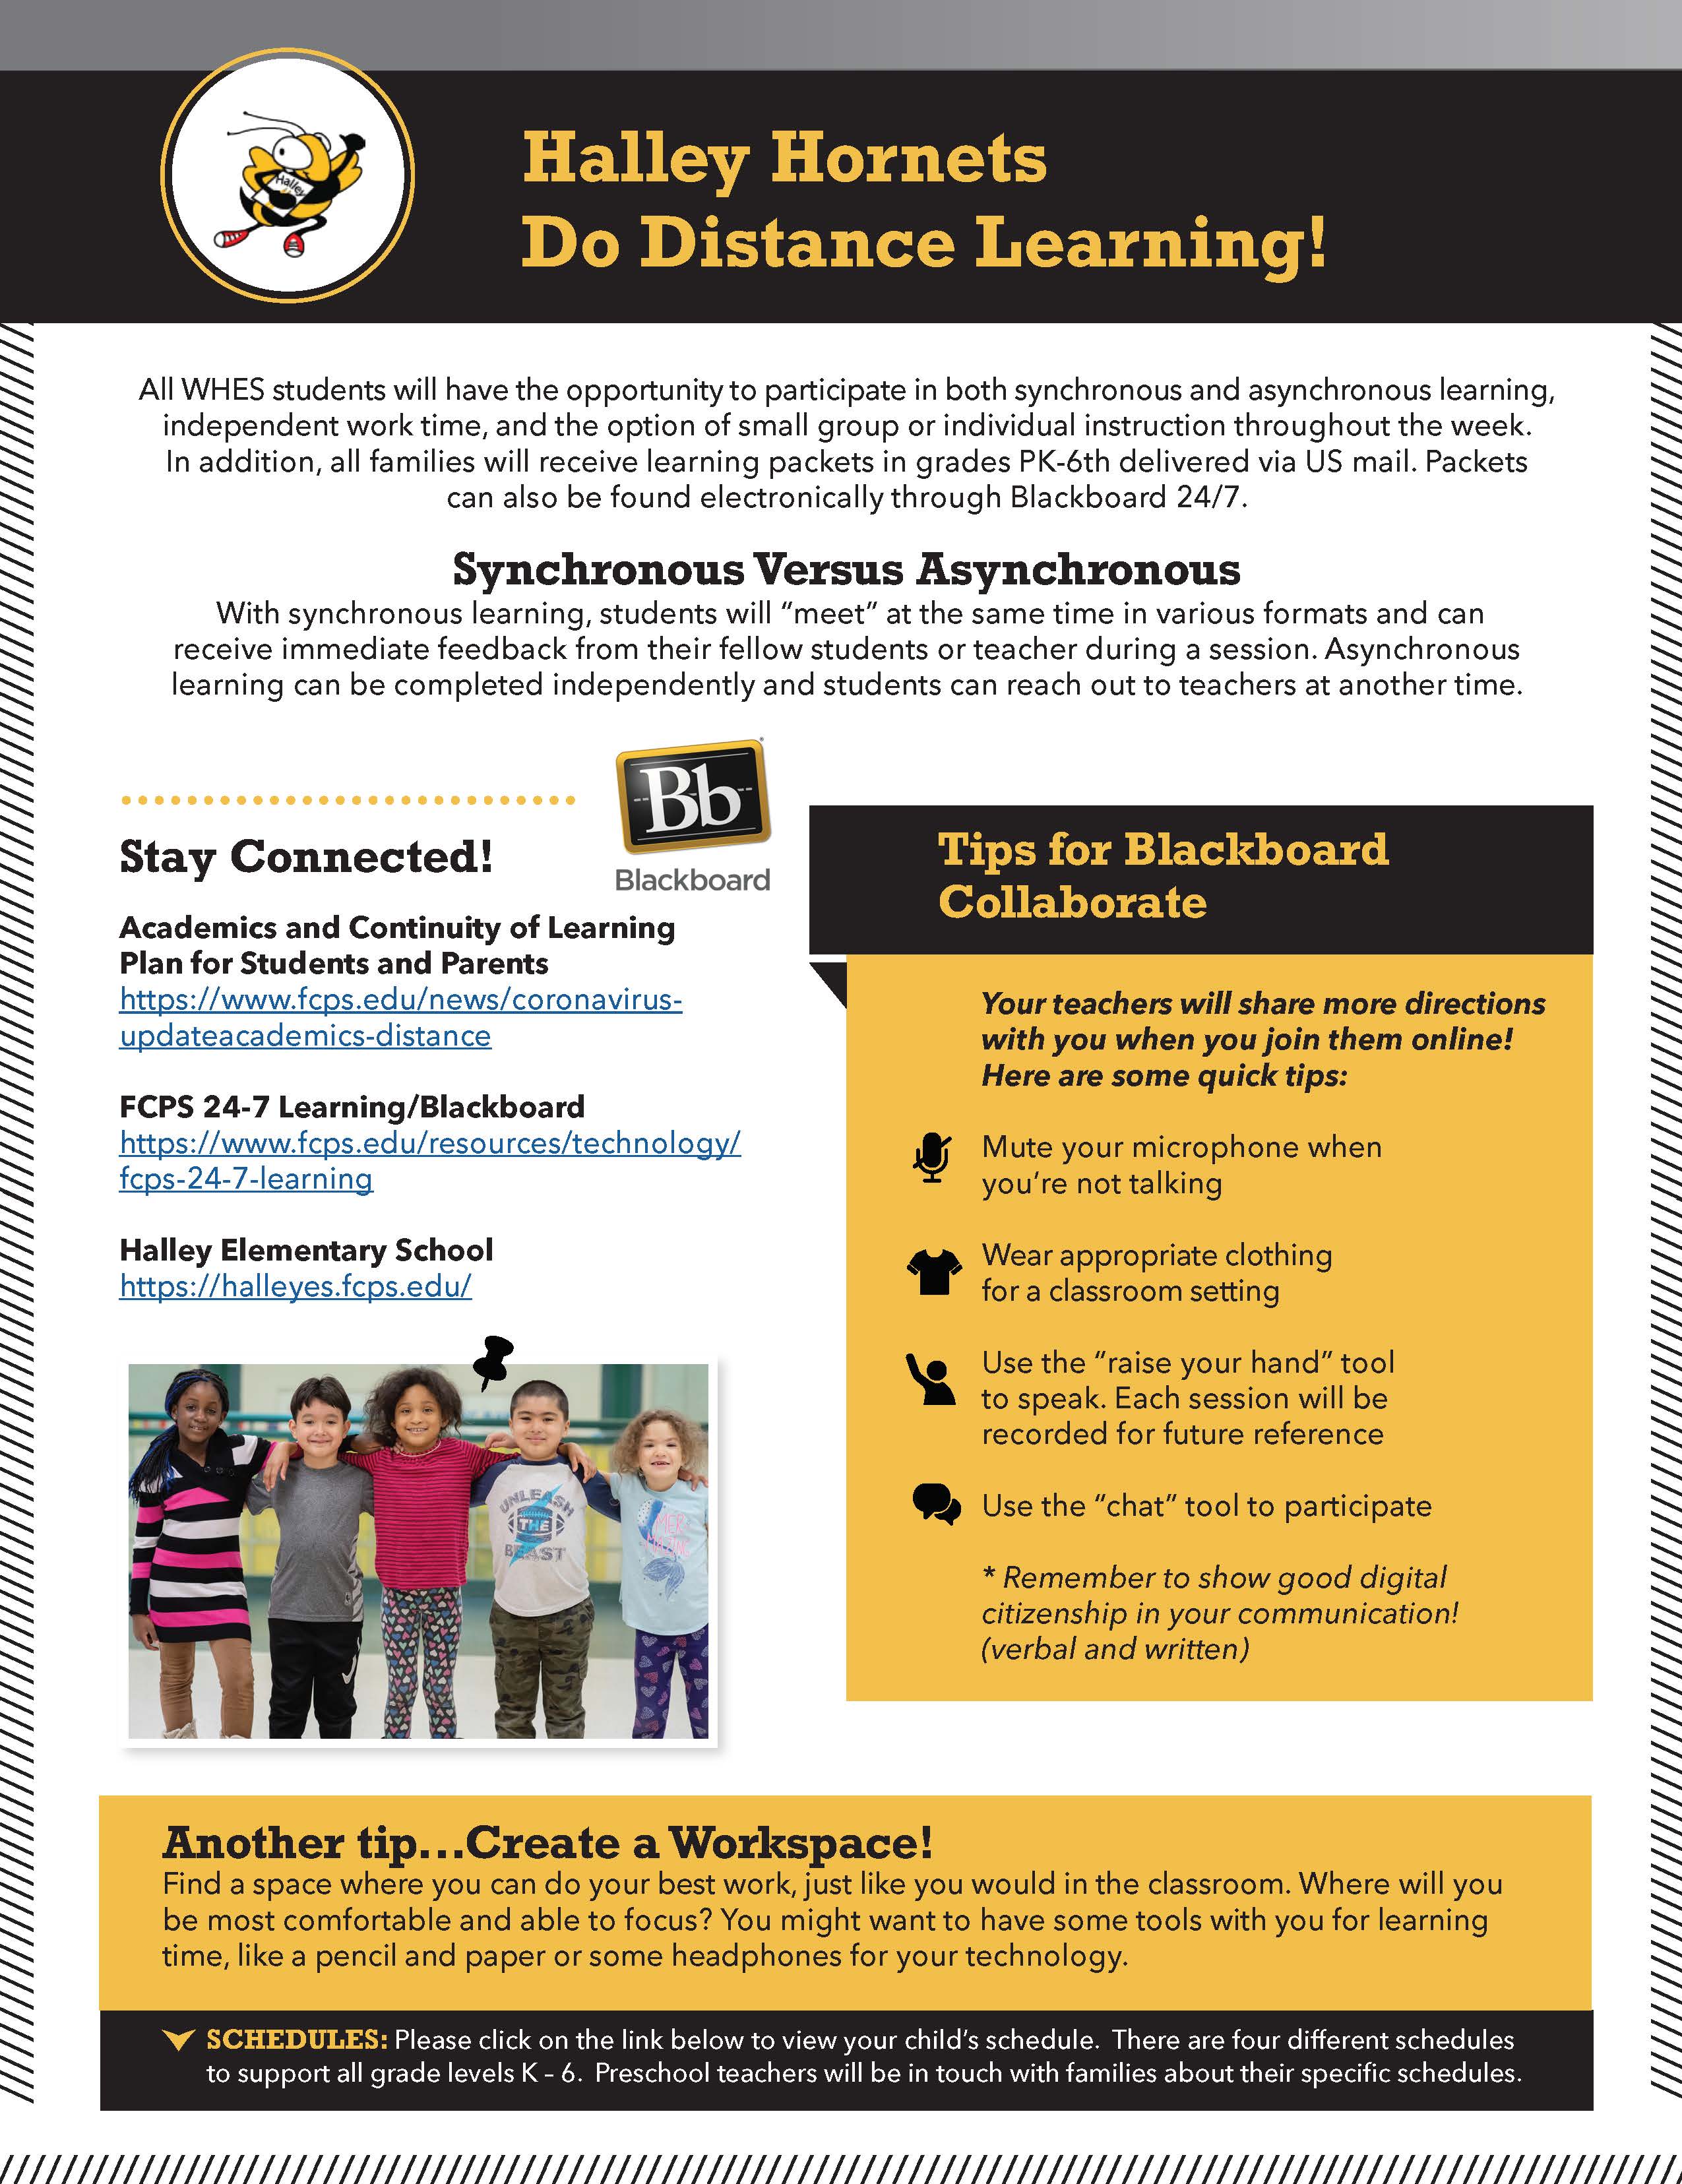 Halley Elementary distance learning plan